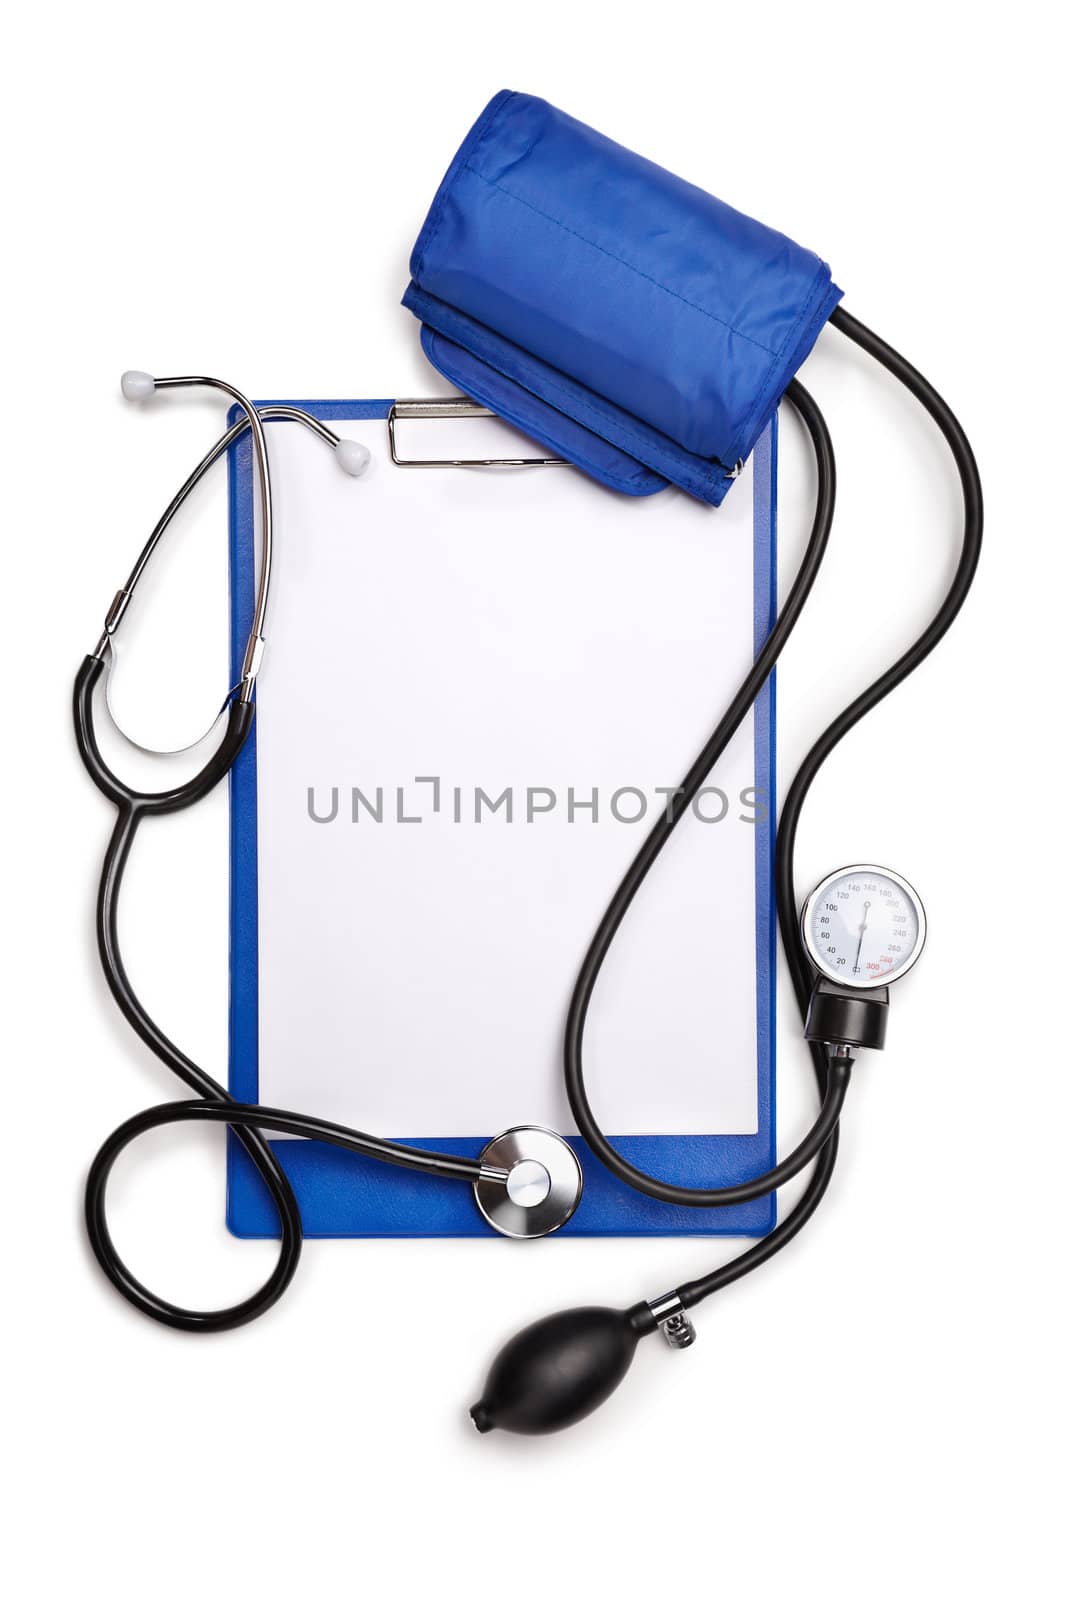 Blank clipboard with stethoscope and tonometer by Kuzma